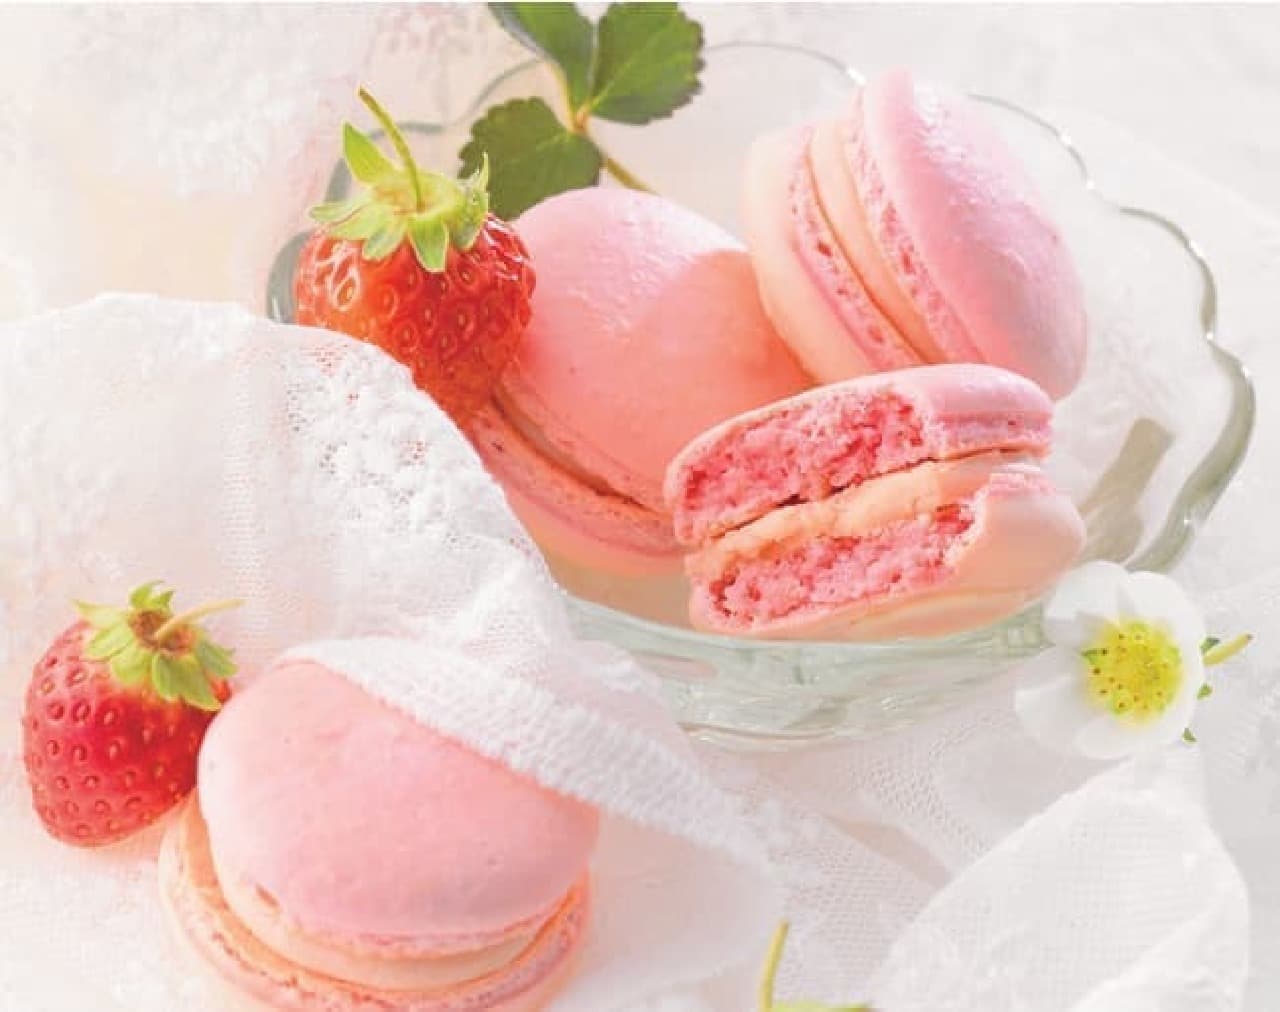 Lloyds "Strawberry & Fromage Macaron [6 Pieces]"